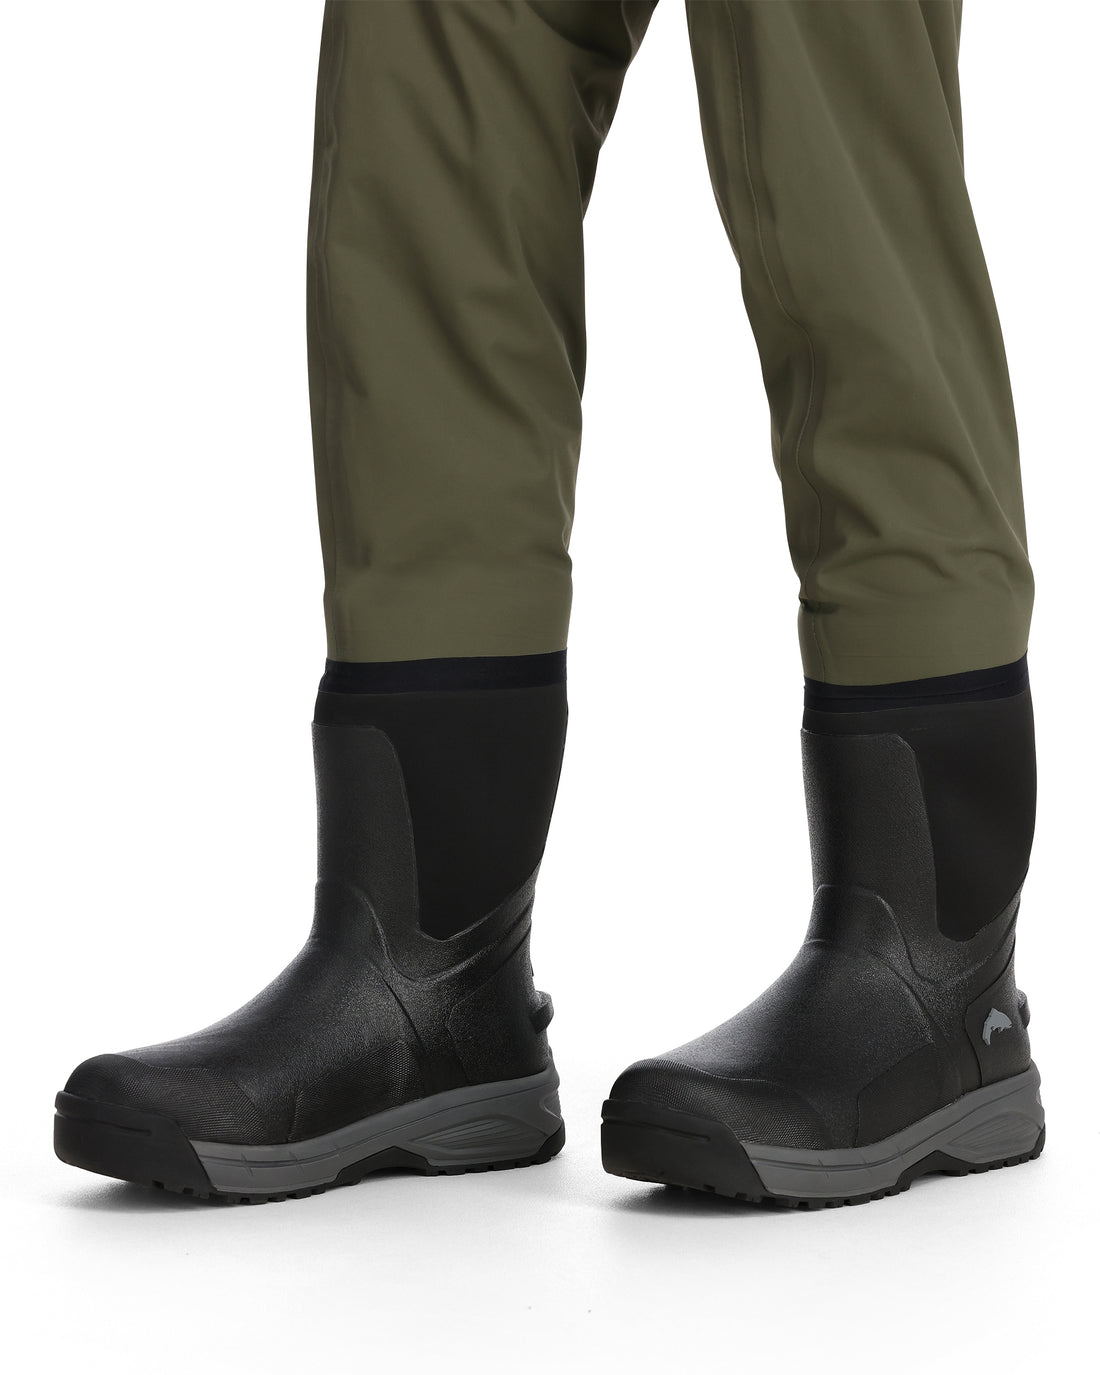 Simms M's Freestone Z Bootfoot Waders - Rubber